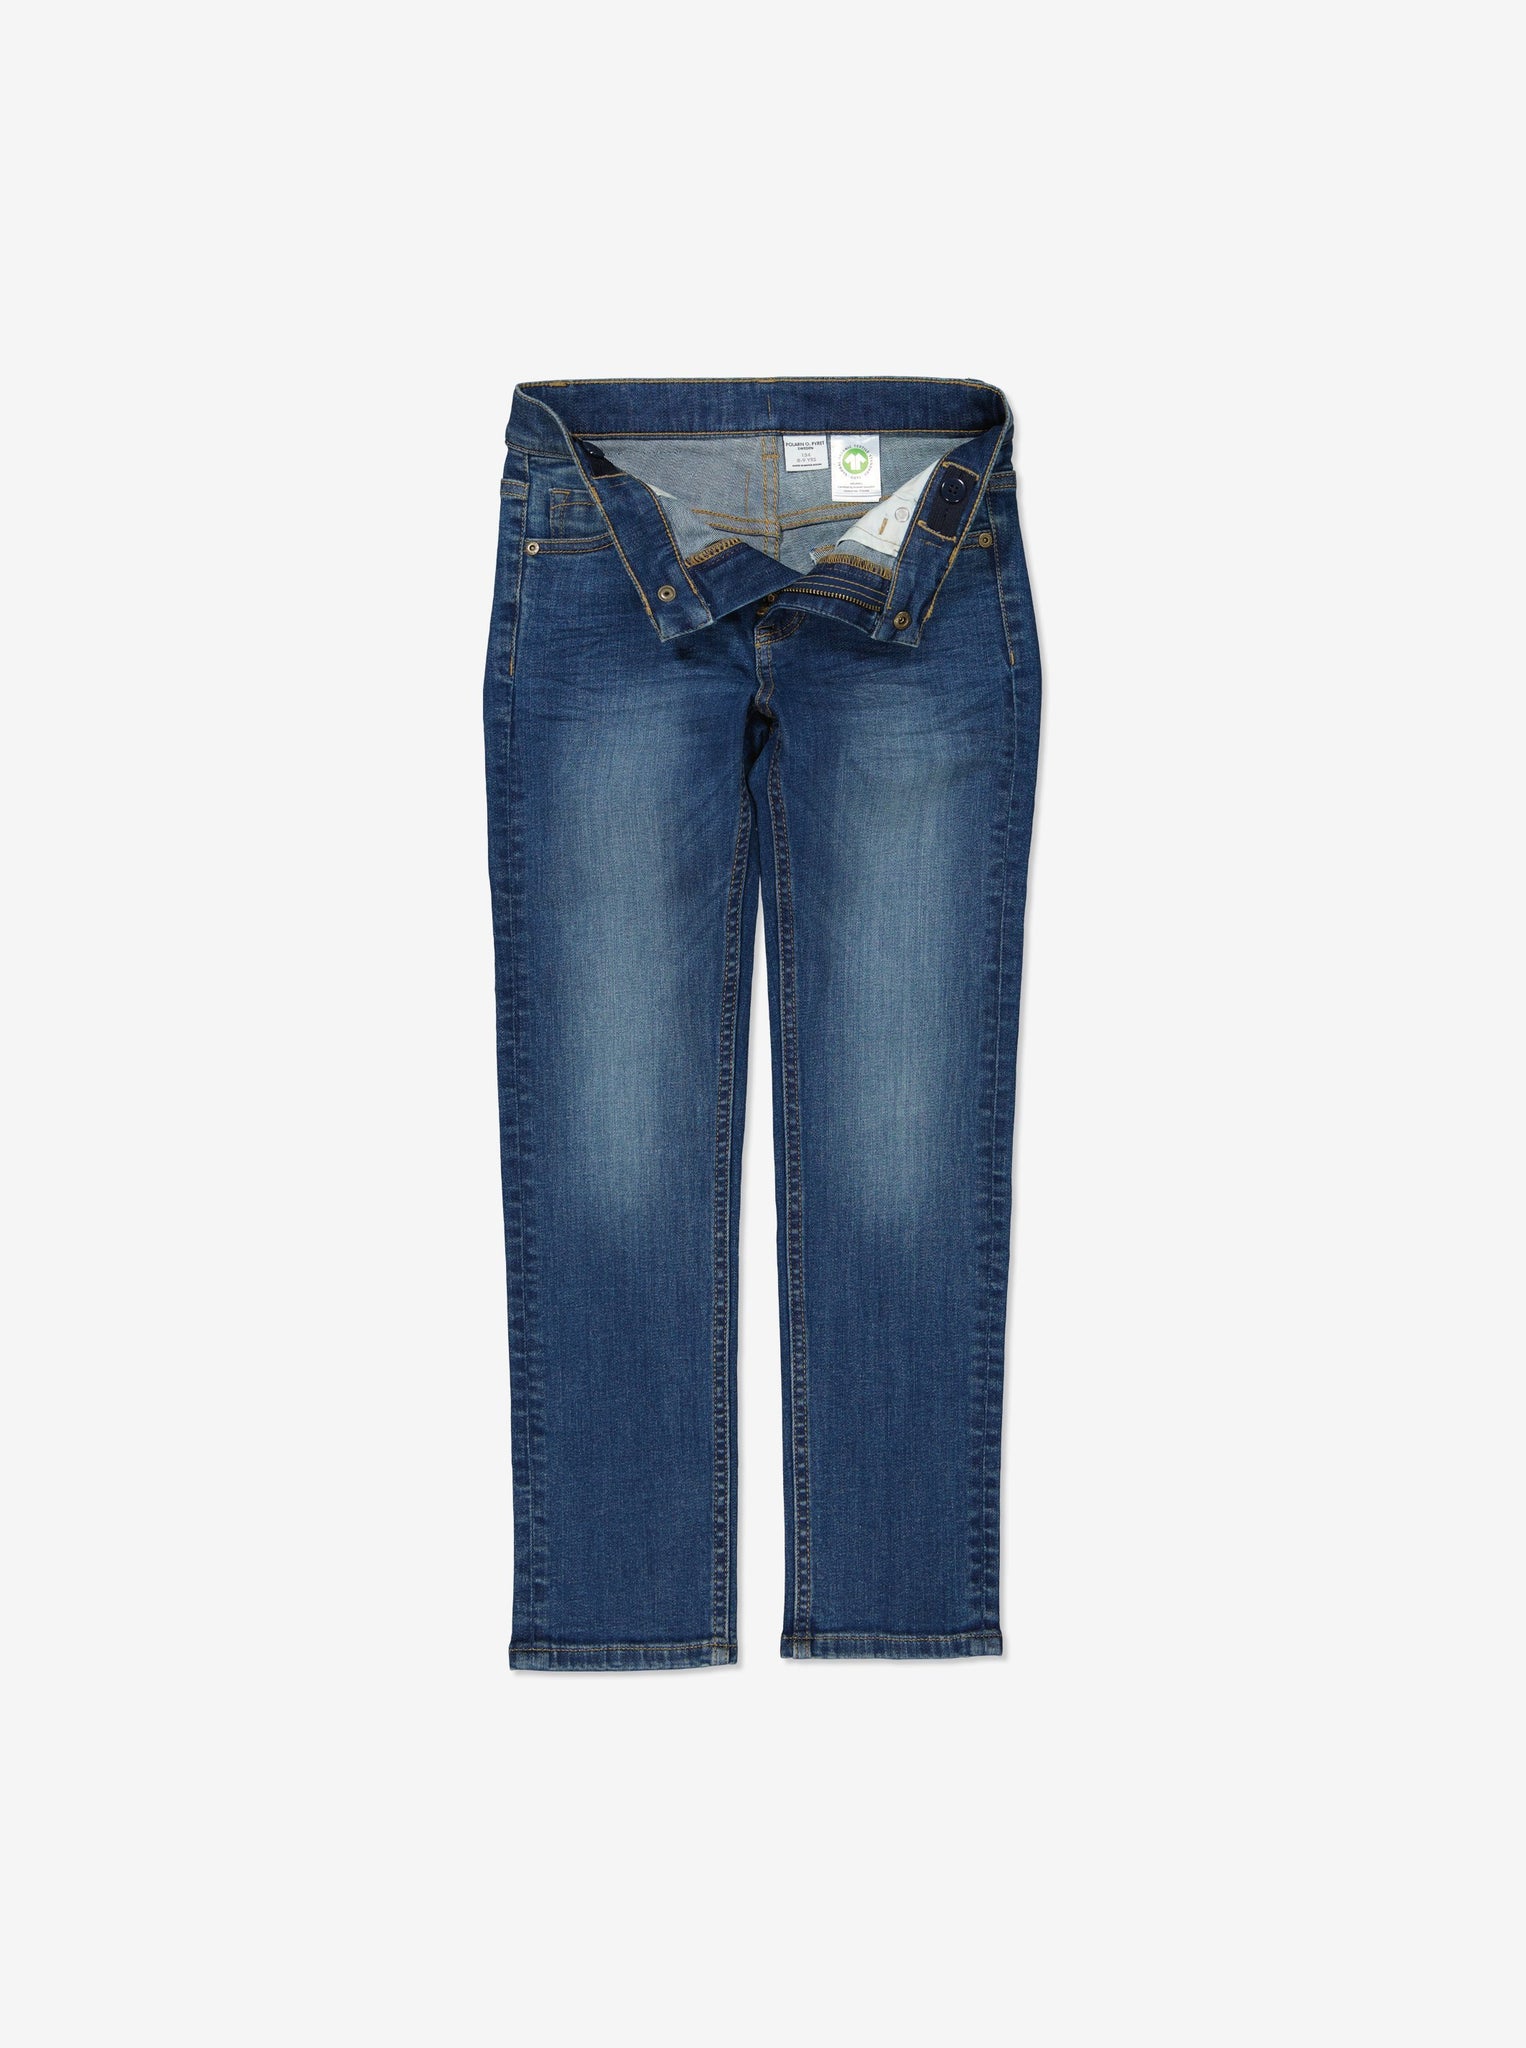  Organic Slim Fit Kids Blue Denim Jeans from Polarn O. Pyret Kidswear. Made from sustainably sourced materials.